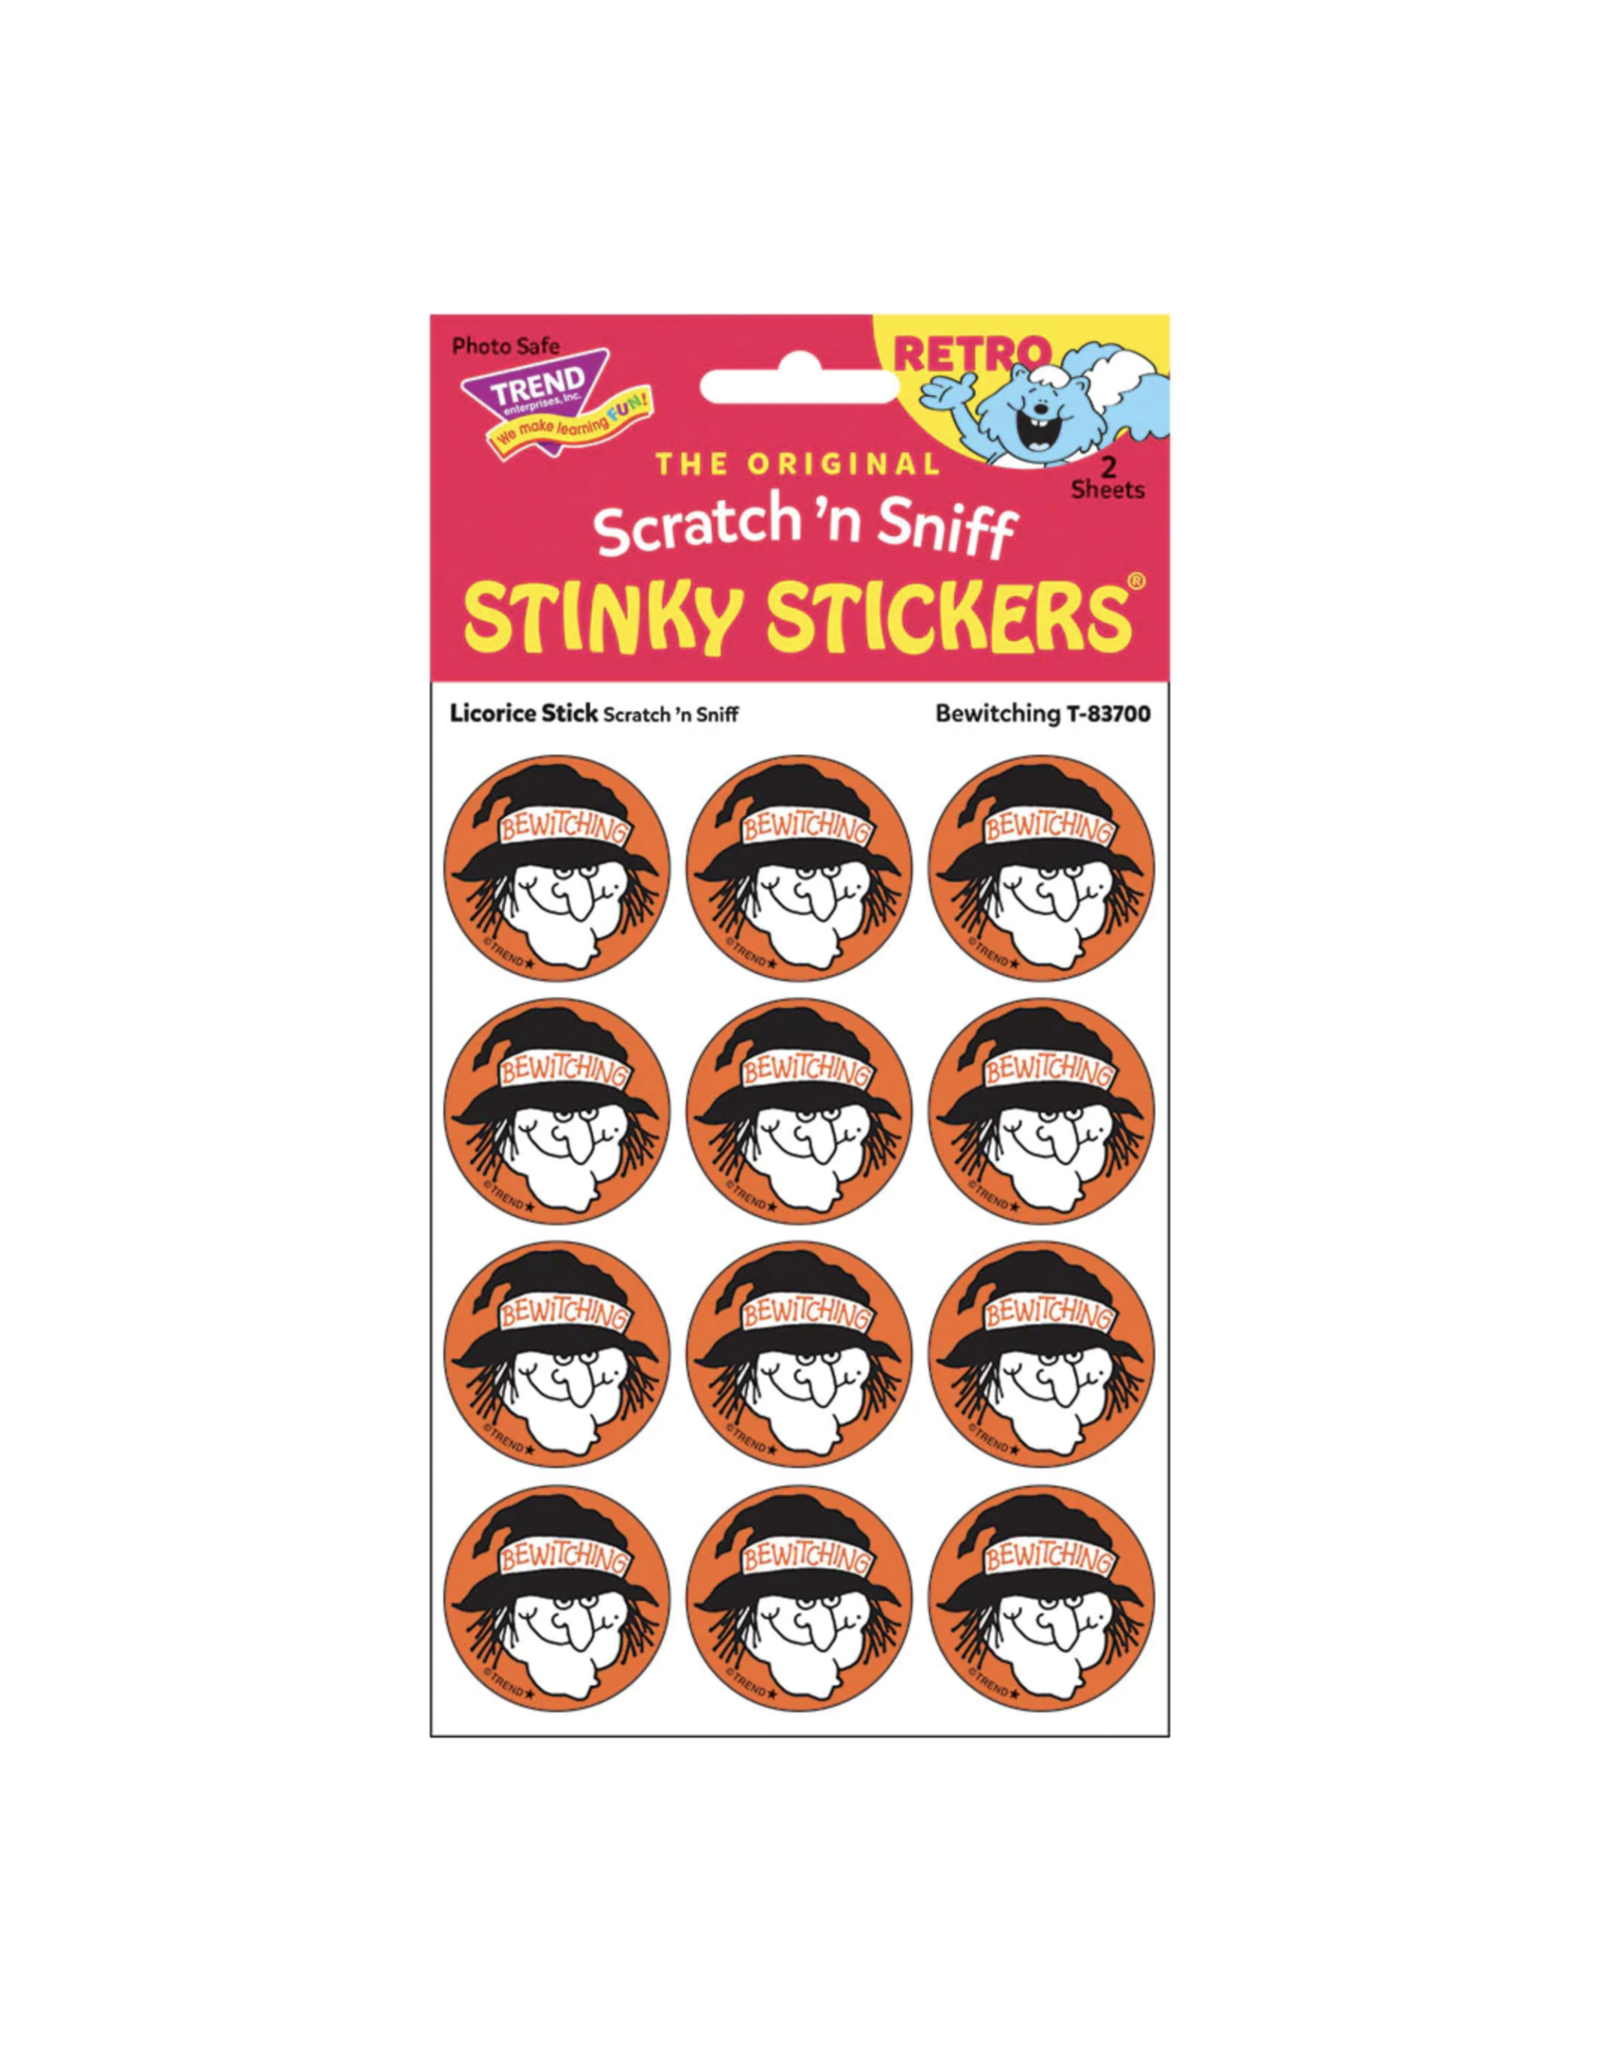 Trend Enterprise Bewitching - Licorice Stick Scent Retro Scratch 'n Sniff Stinky Stickers